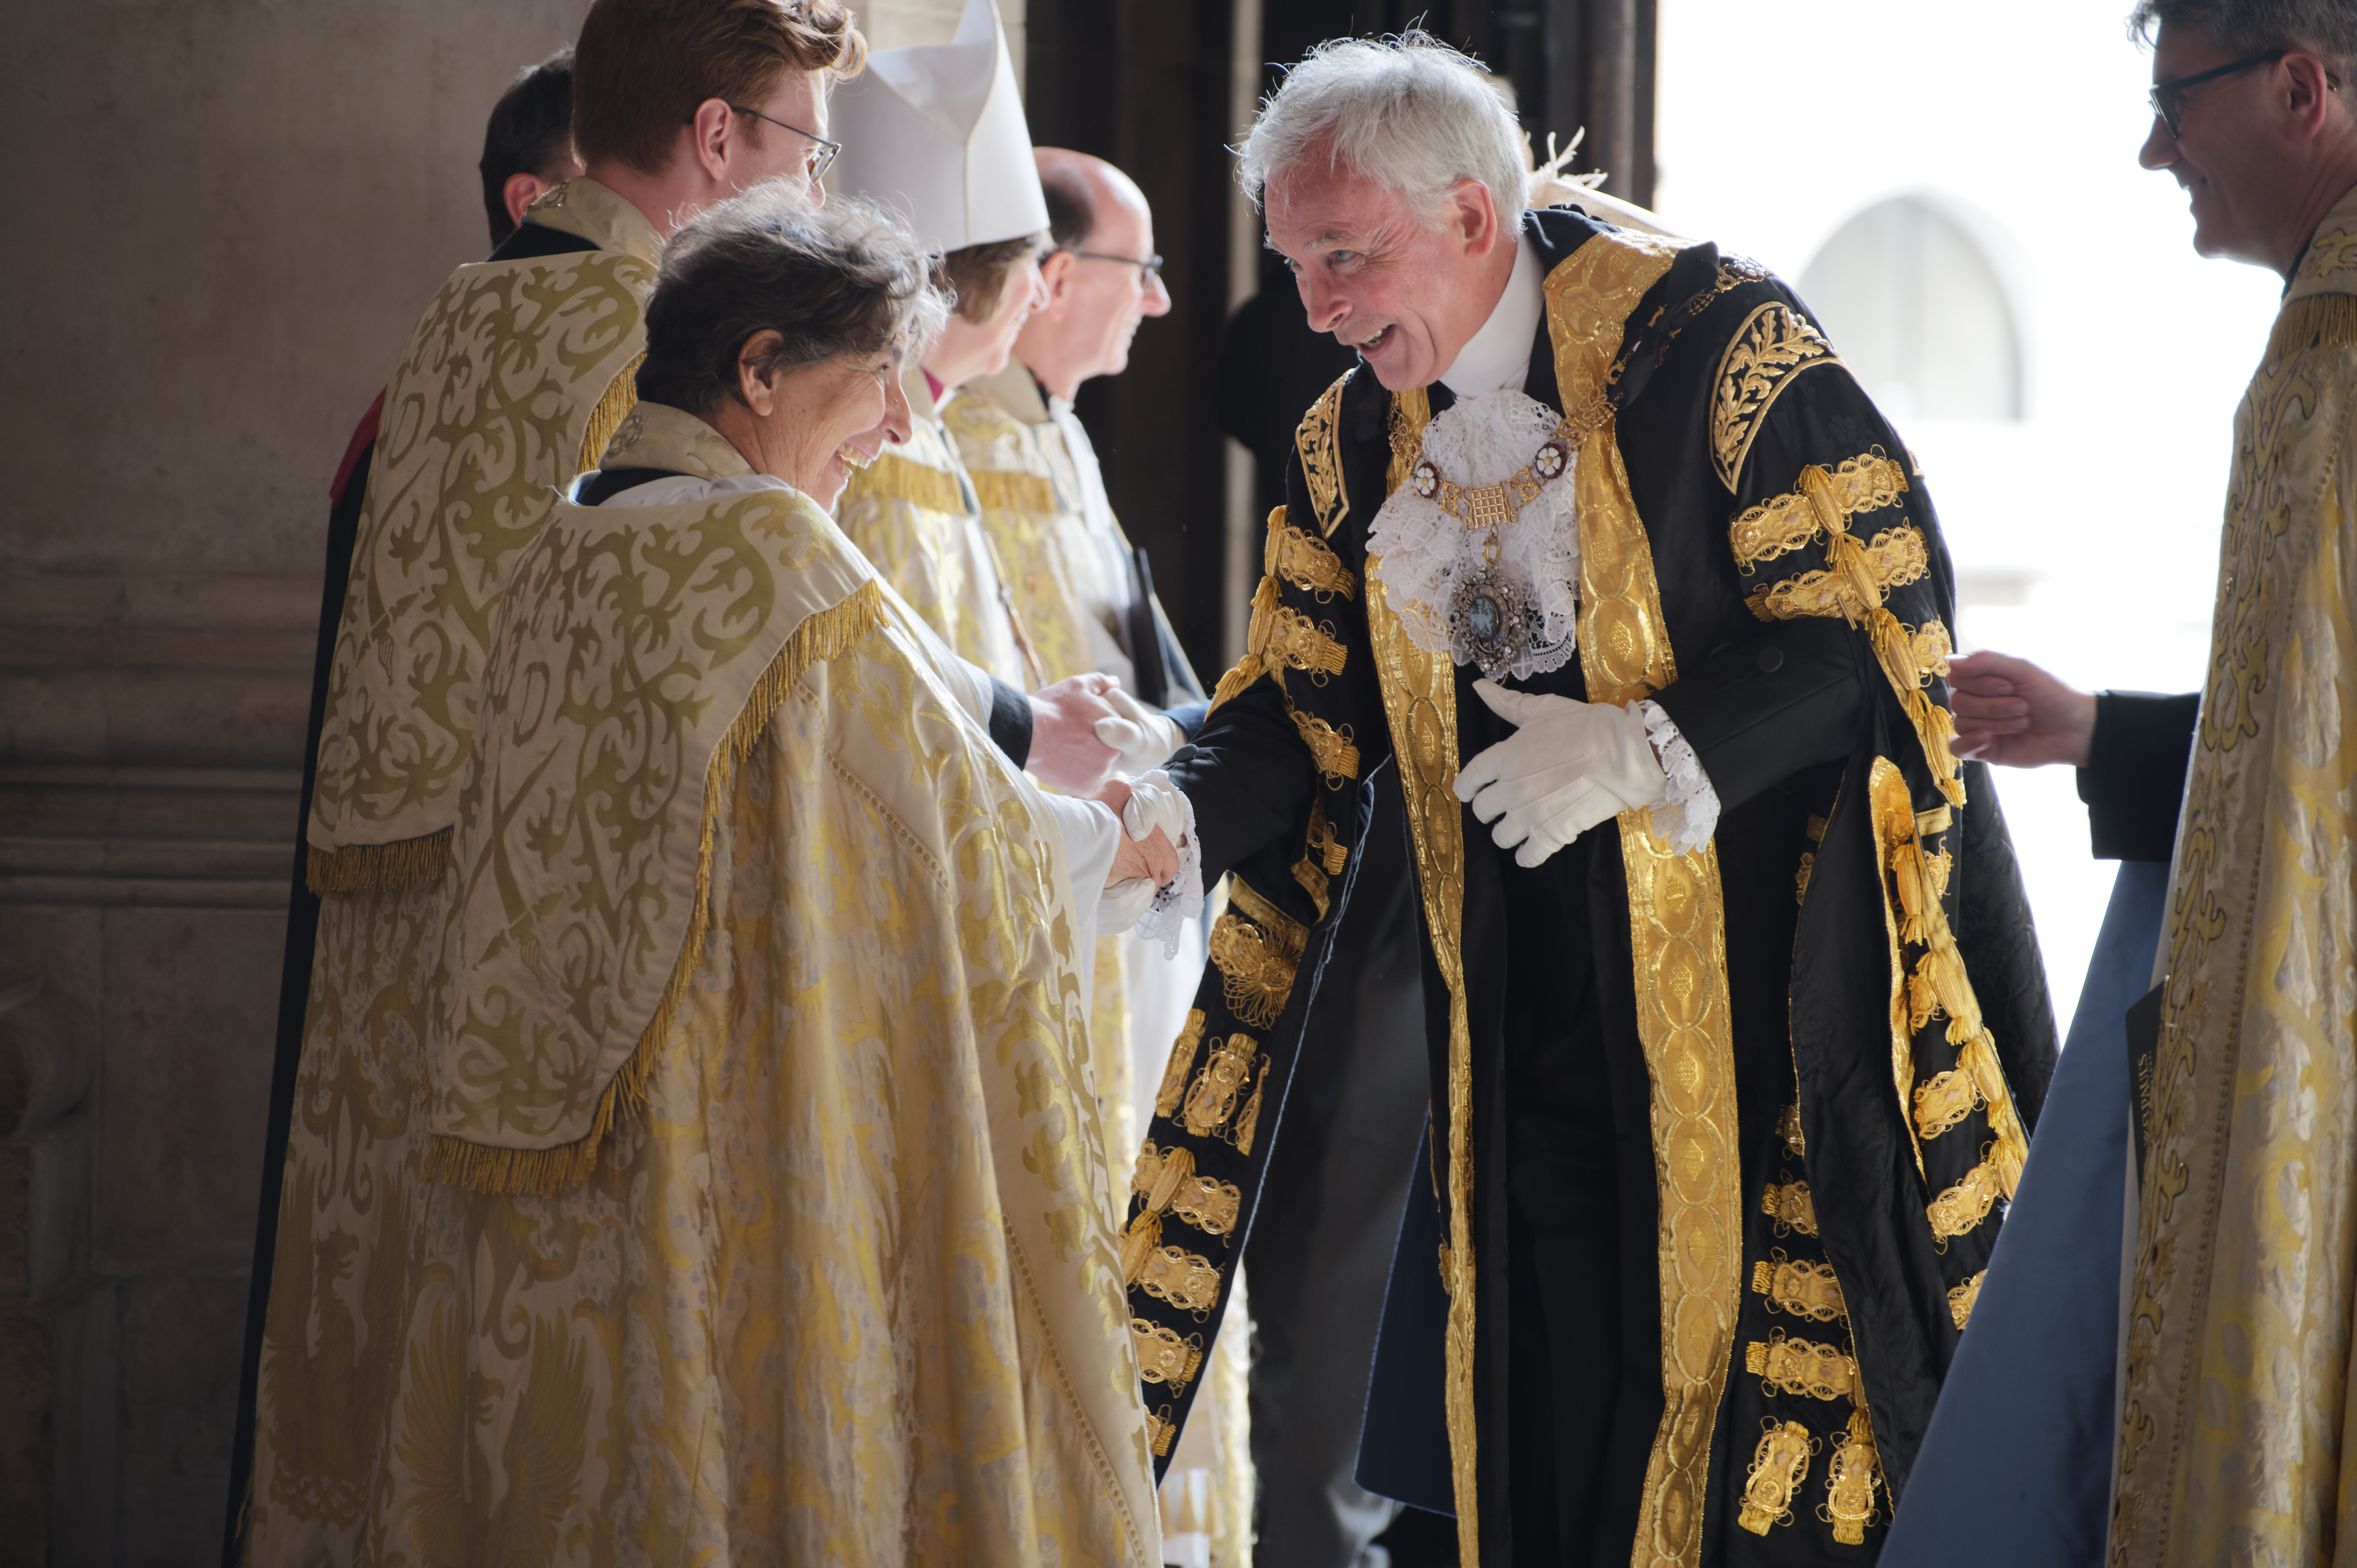 The Mayor of London, dressed in a black and gold gown, shaking someone's hand.